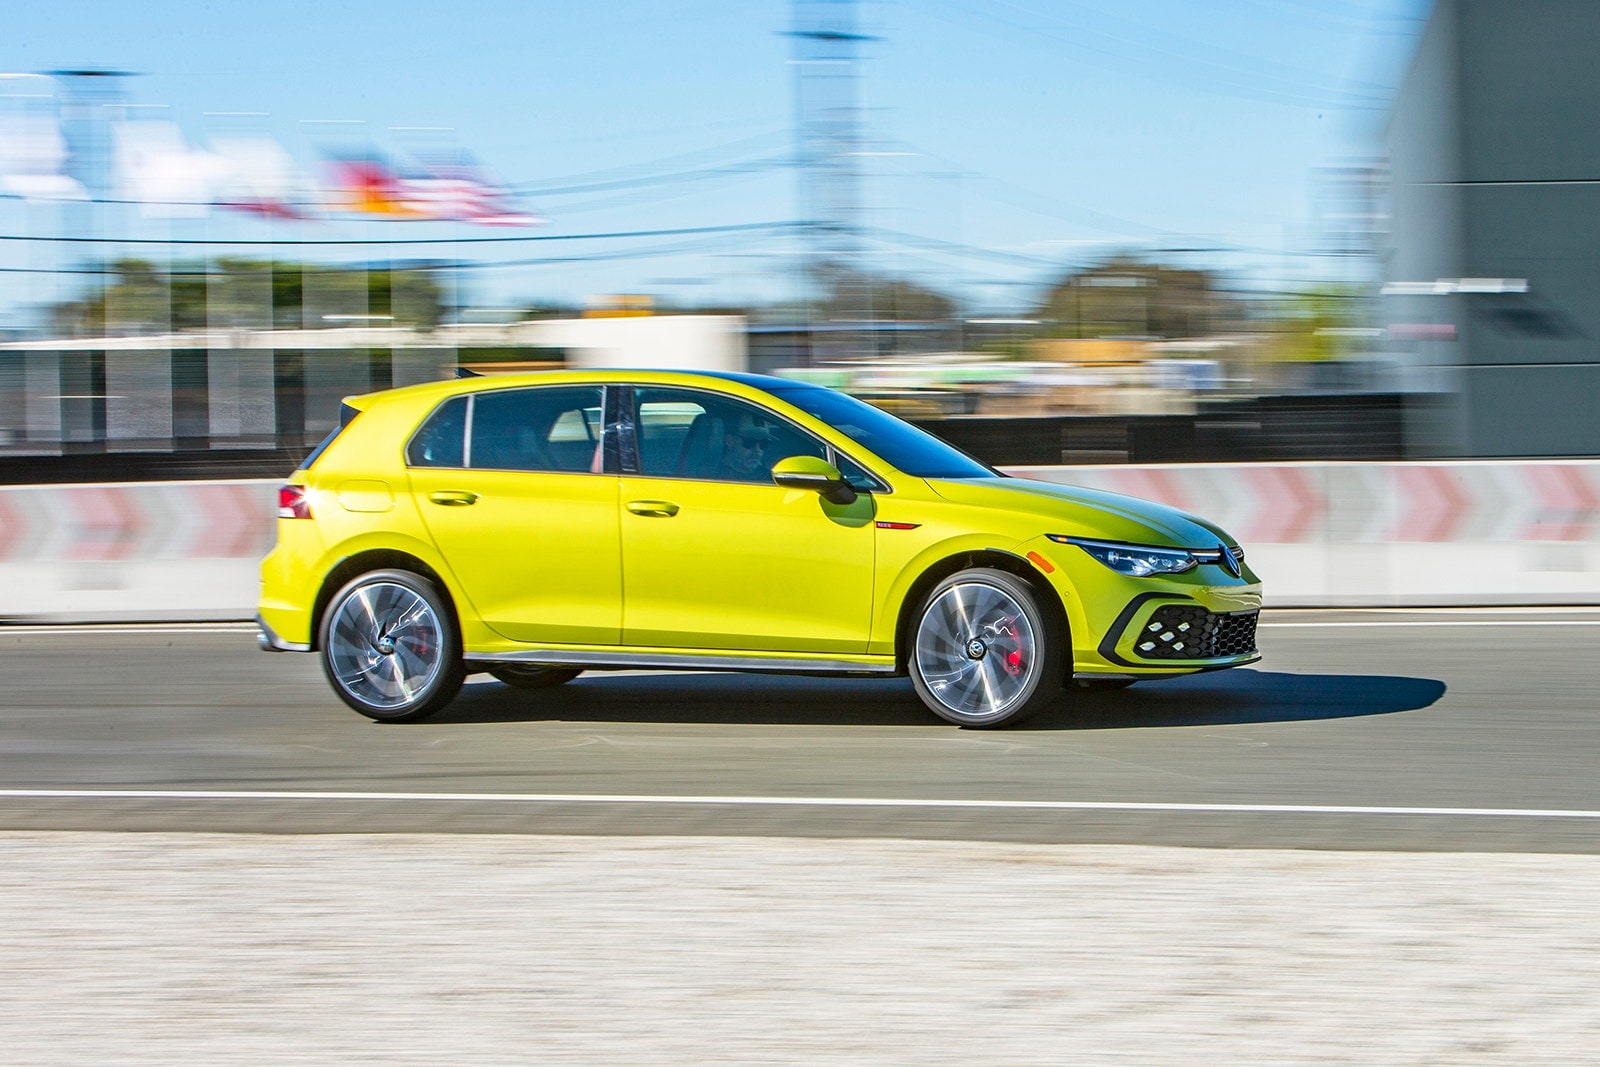 2022 Volkswagen Golf GTI profile view on a racetrack